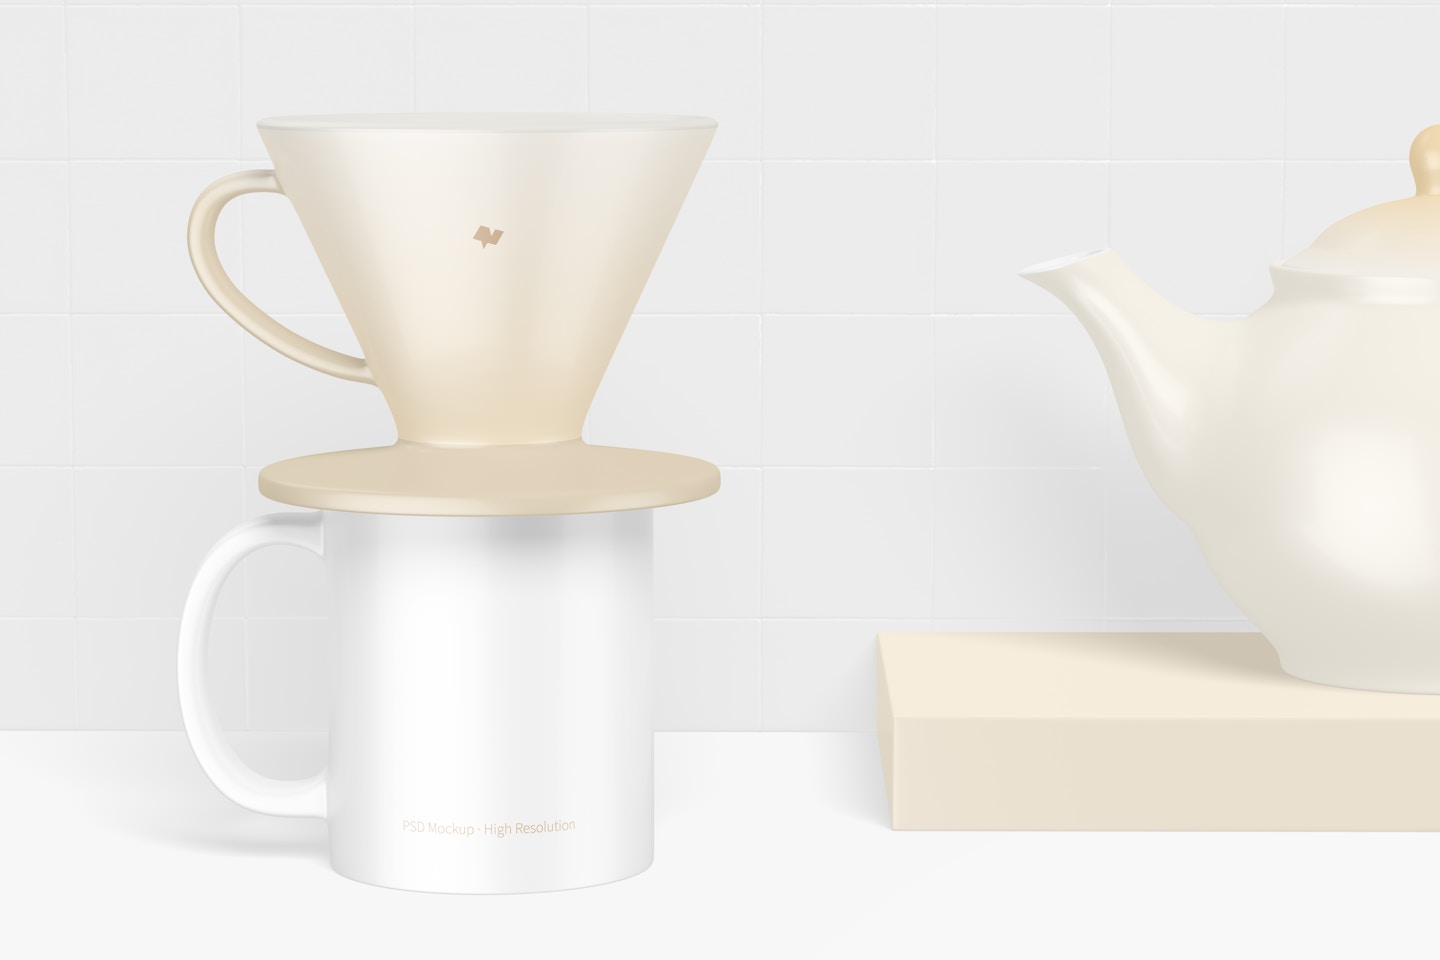 Coffee Dripper with Teapot Mockup